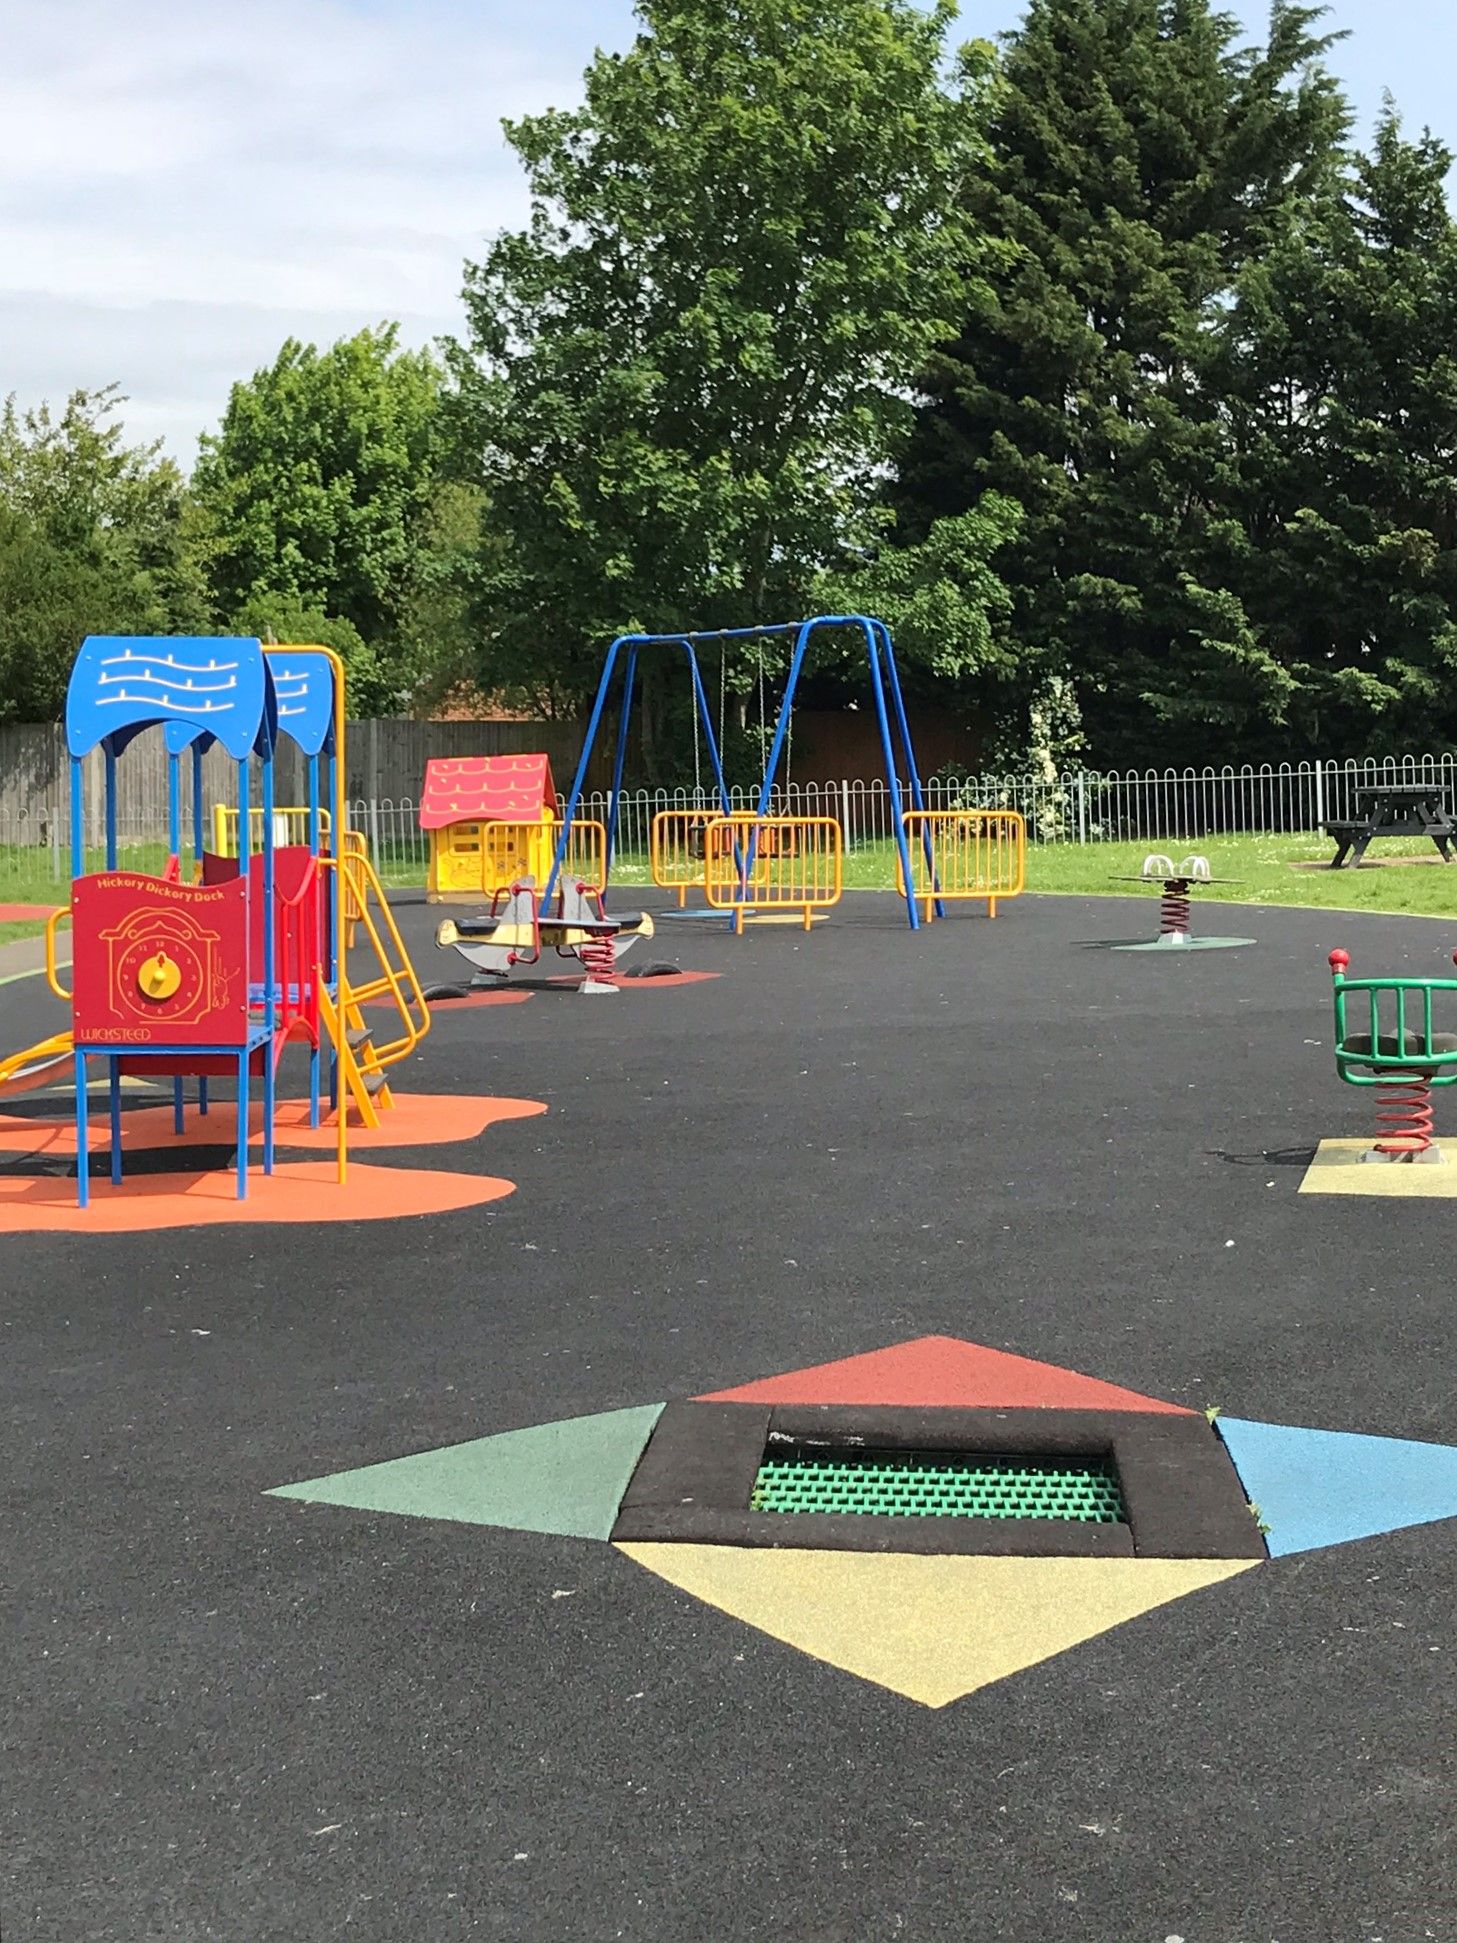 Younger children's play area; climbing frame and in-floor trampolines